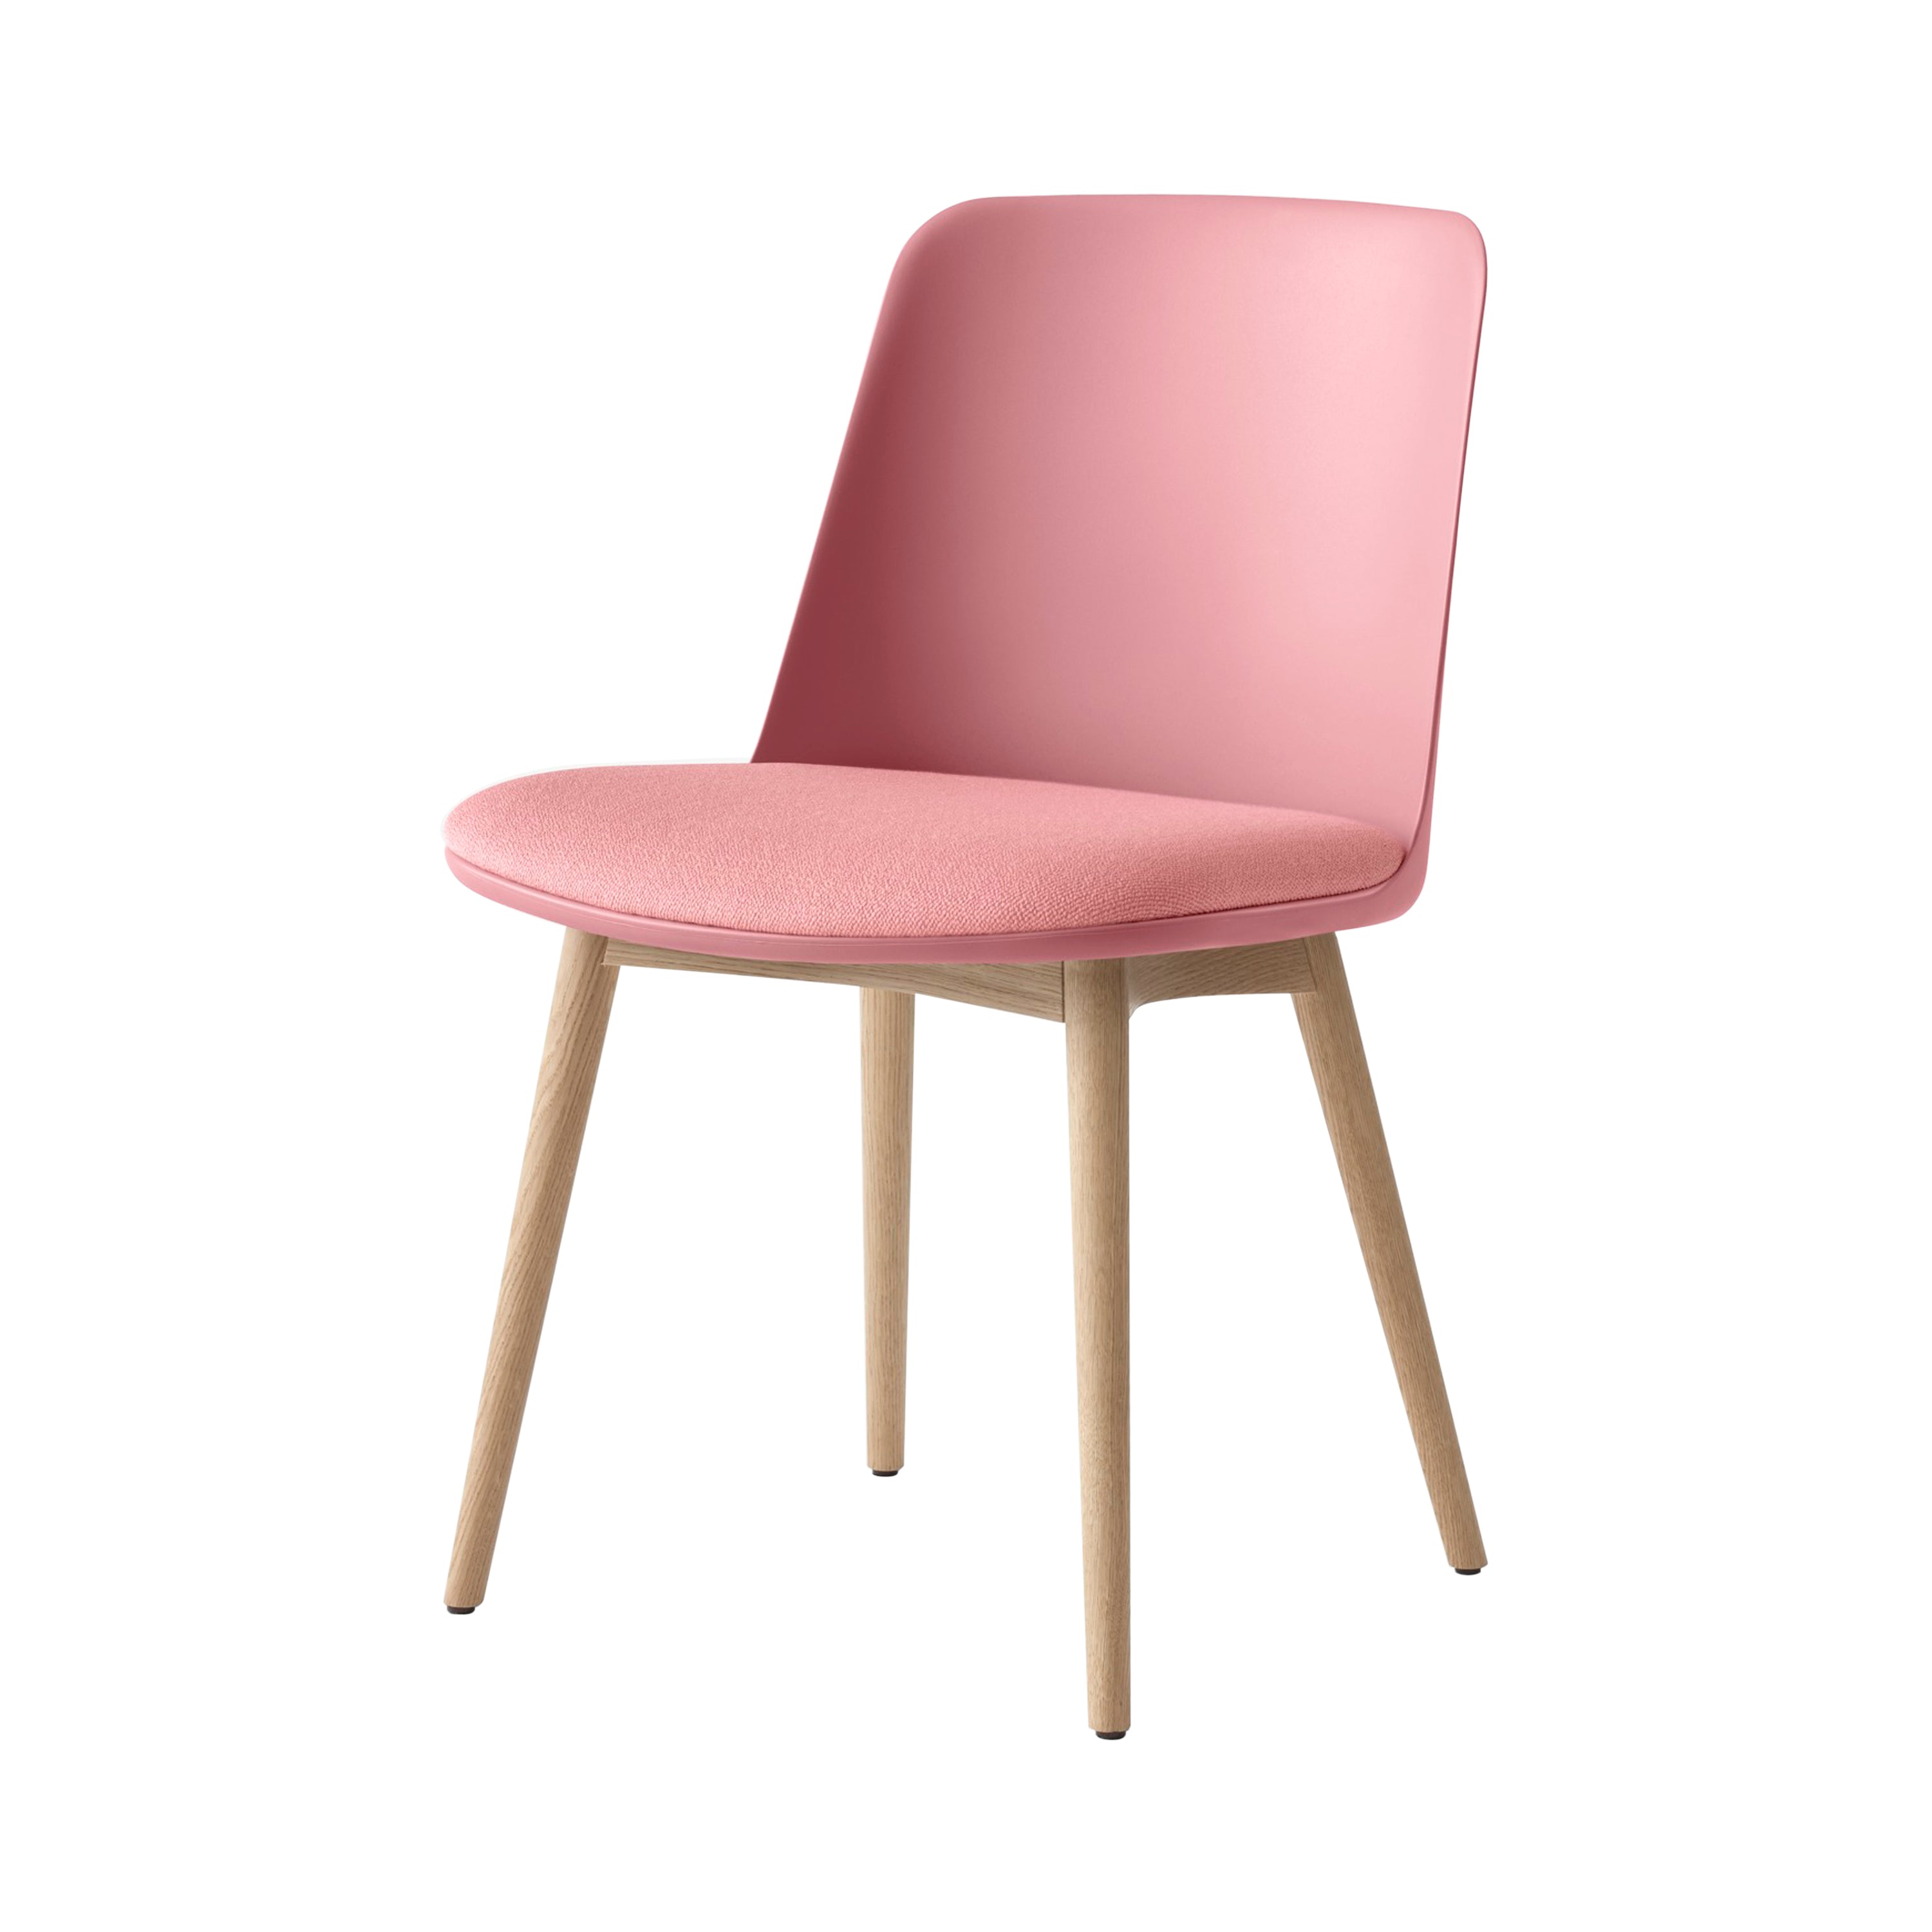 Rely Side Chair HW72: Soft Pink + Oak